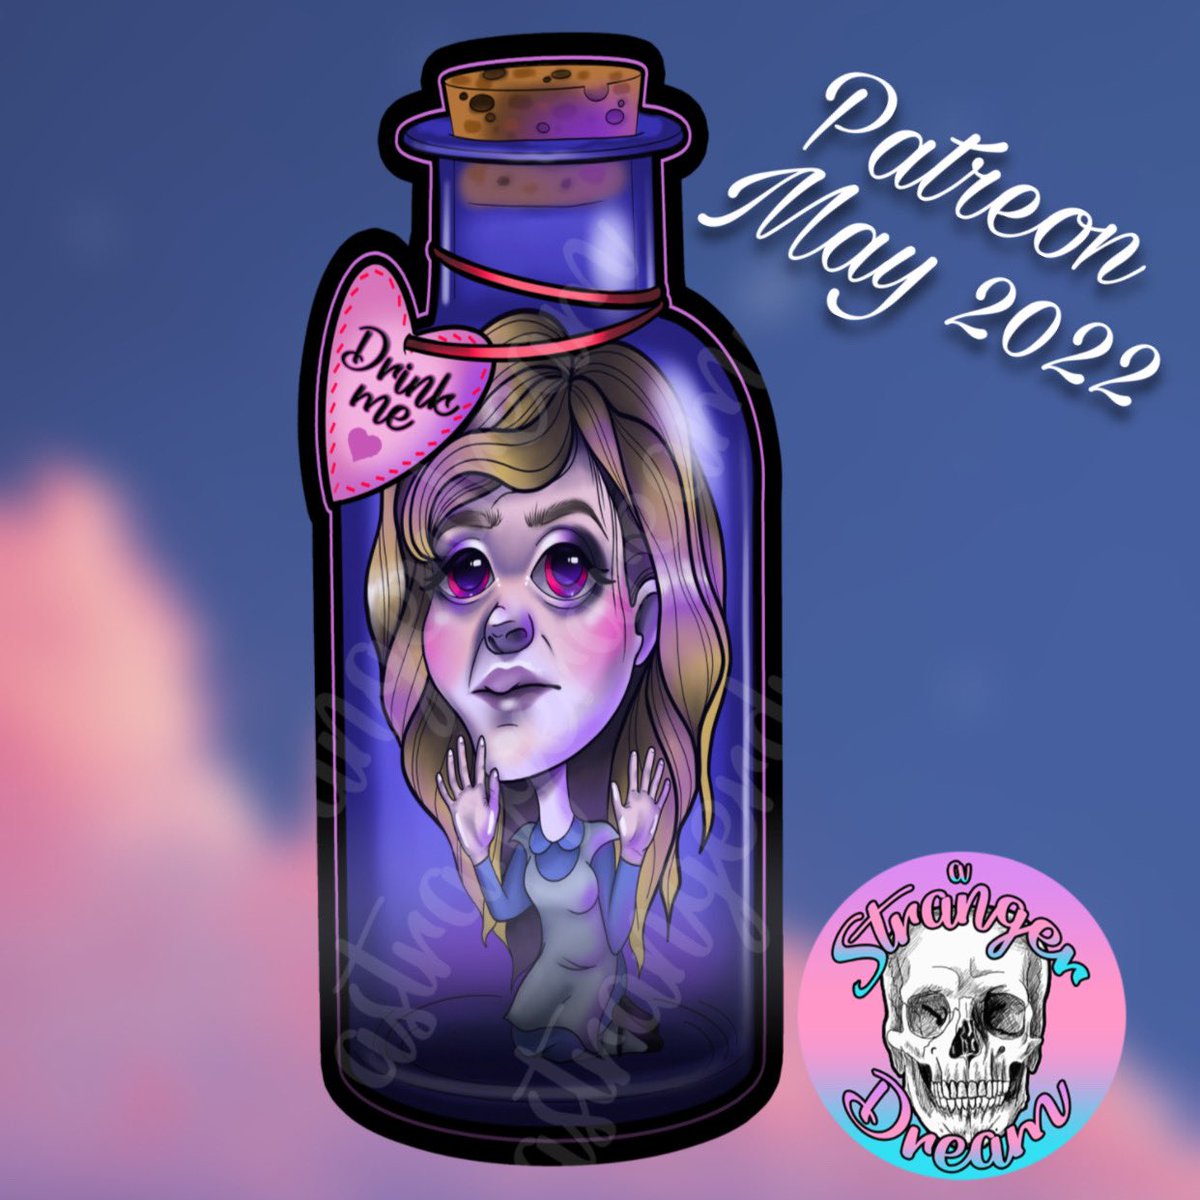 Today is the last day to sign up to get this bookmark! It won’t be available ever again! patreon.com/astrangerdream